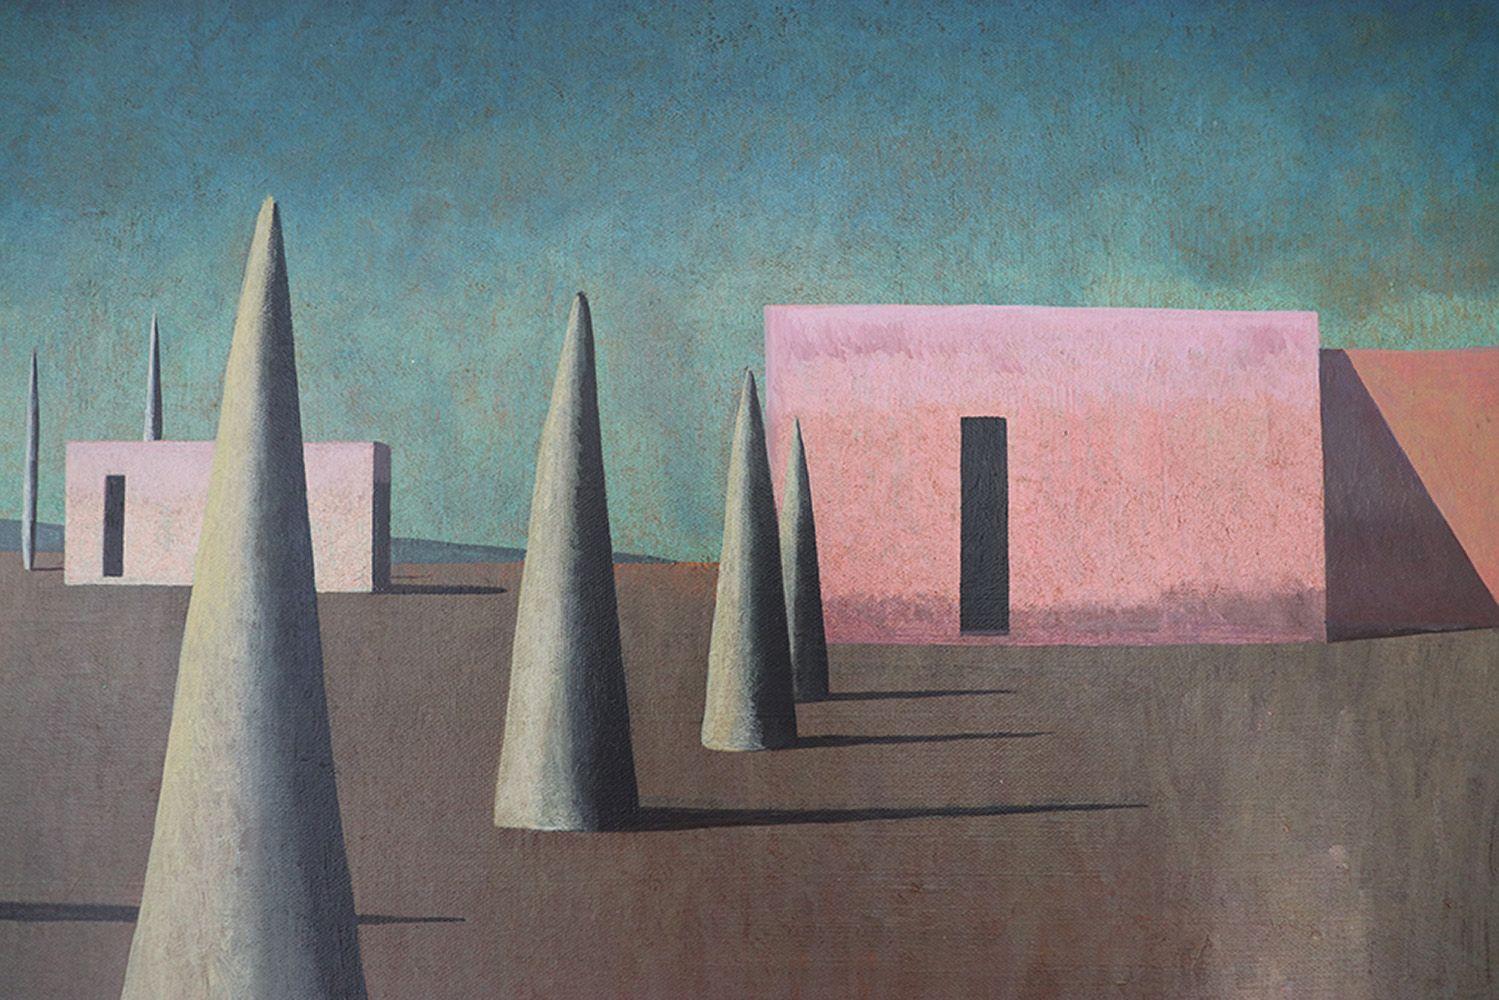 PA-EN by Spanish contemporary artist Ramon Enrich. 
Acrylic on canvas, 40 cm x 60 cm.

In these paintings, the artist establishes a conversation between architecture and landscape in a figurative work boasting geometric shapes and an enigmatic